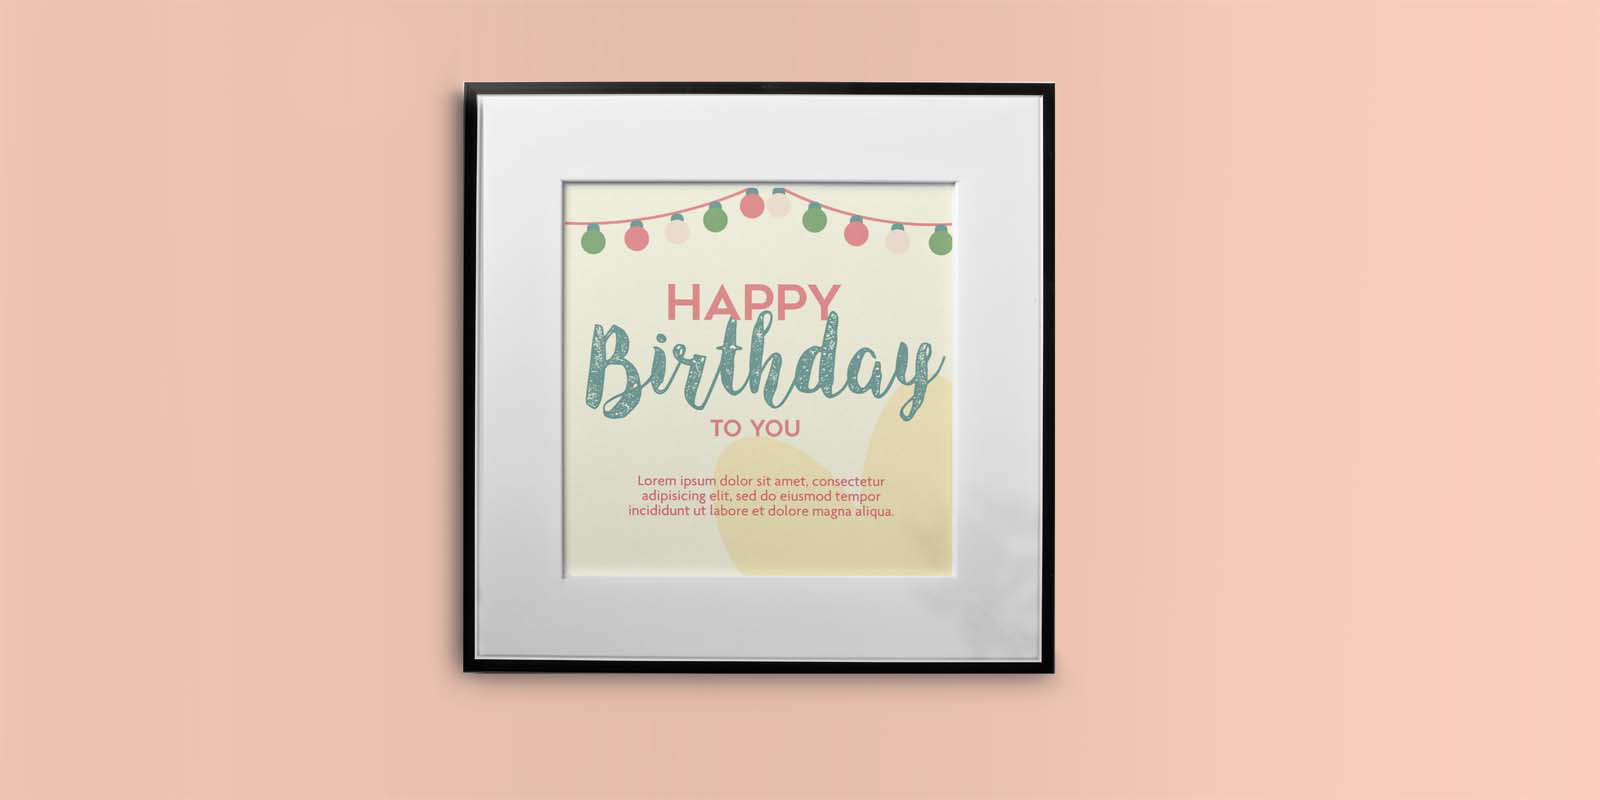 Birthday prints in Adelaide - Print with Pagerr